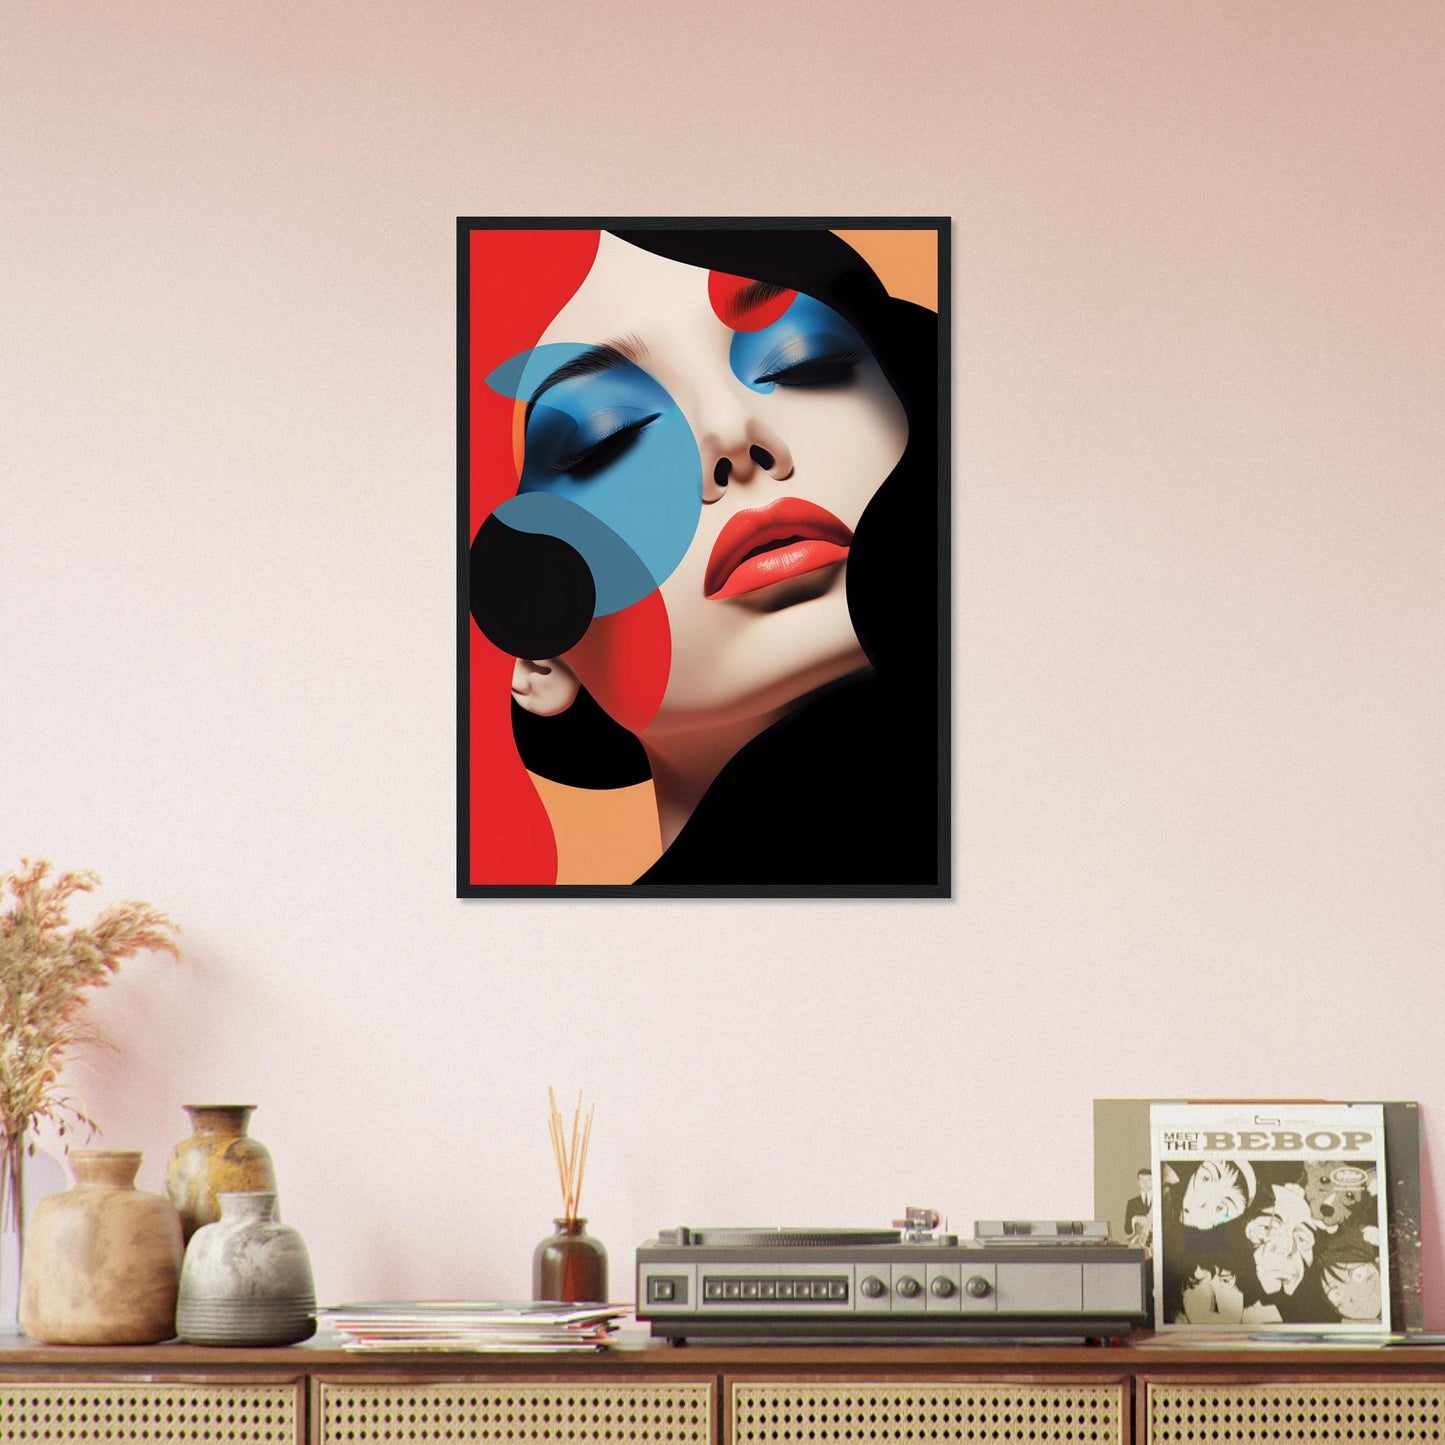 A high quality framed art print of A Dream The Oracle Windows™ Collection, perfect as a poster for my wall.